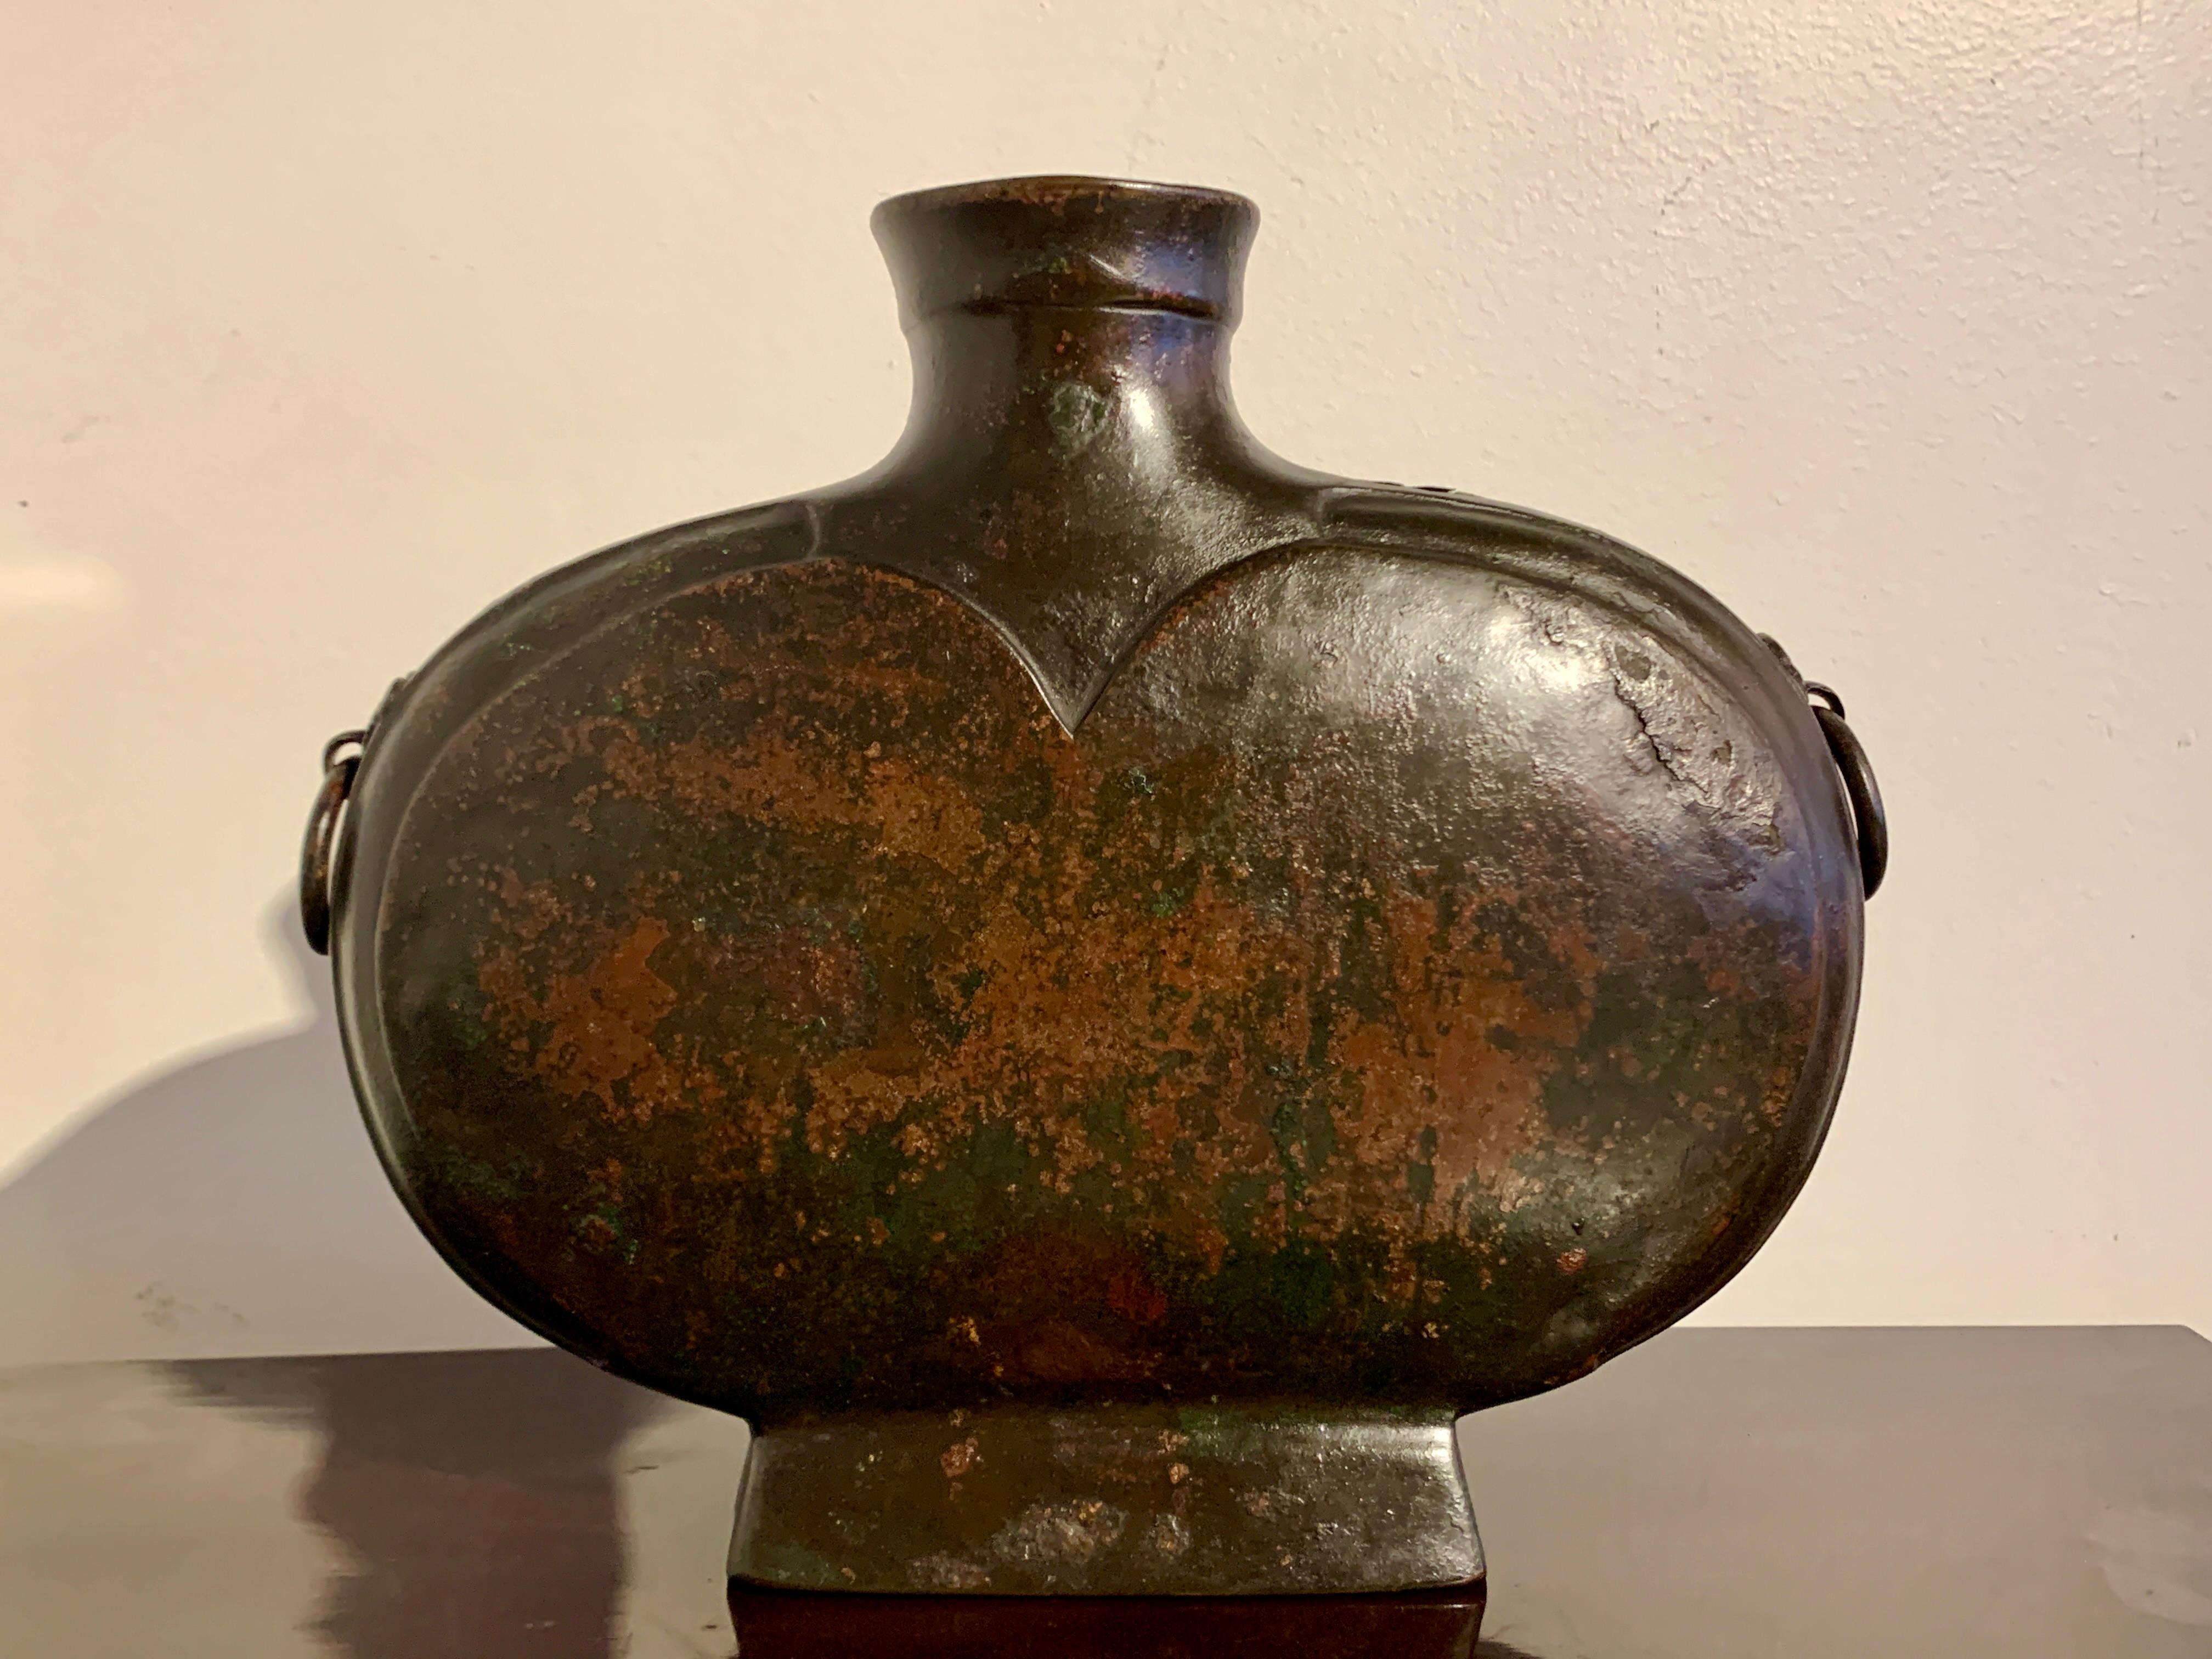 A sublime Chinese archaic bronze wine vessel, called a bianhu, Han Dynasty (206 BC - 220 AD), China.

The bianhu with a flattened oblong body, applied taotie masks, and loose ring handles. The bronze wine vessel set on a high rectangular splayed